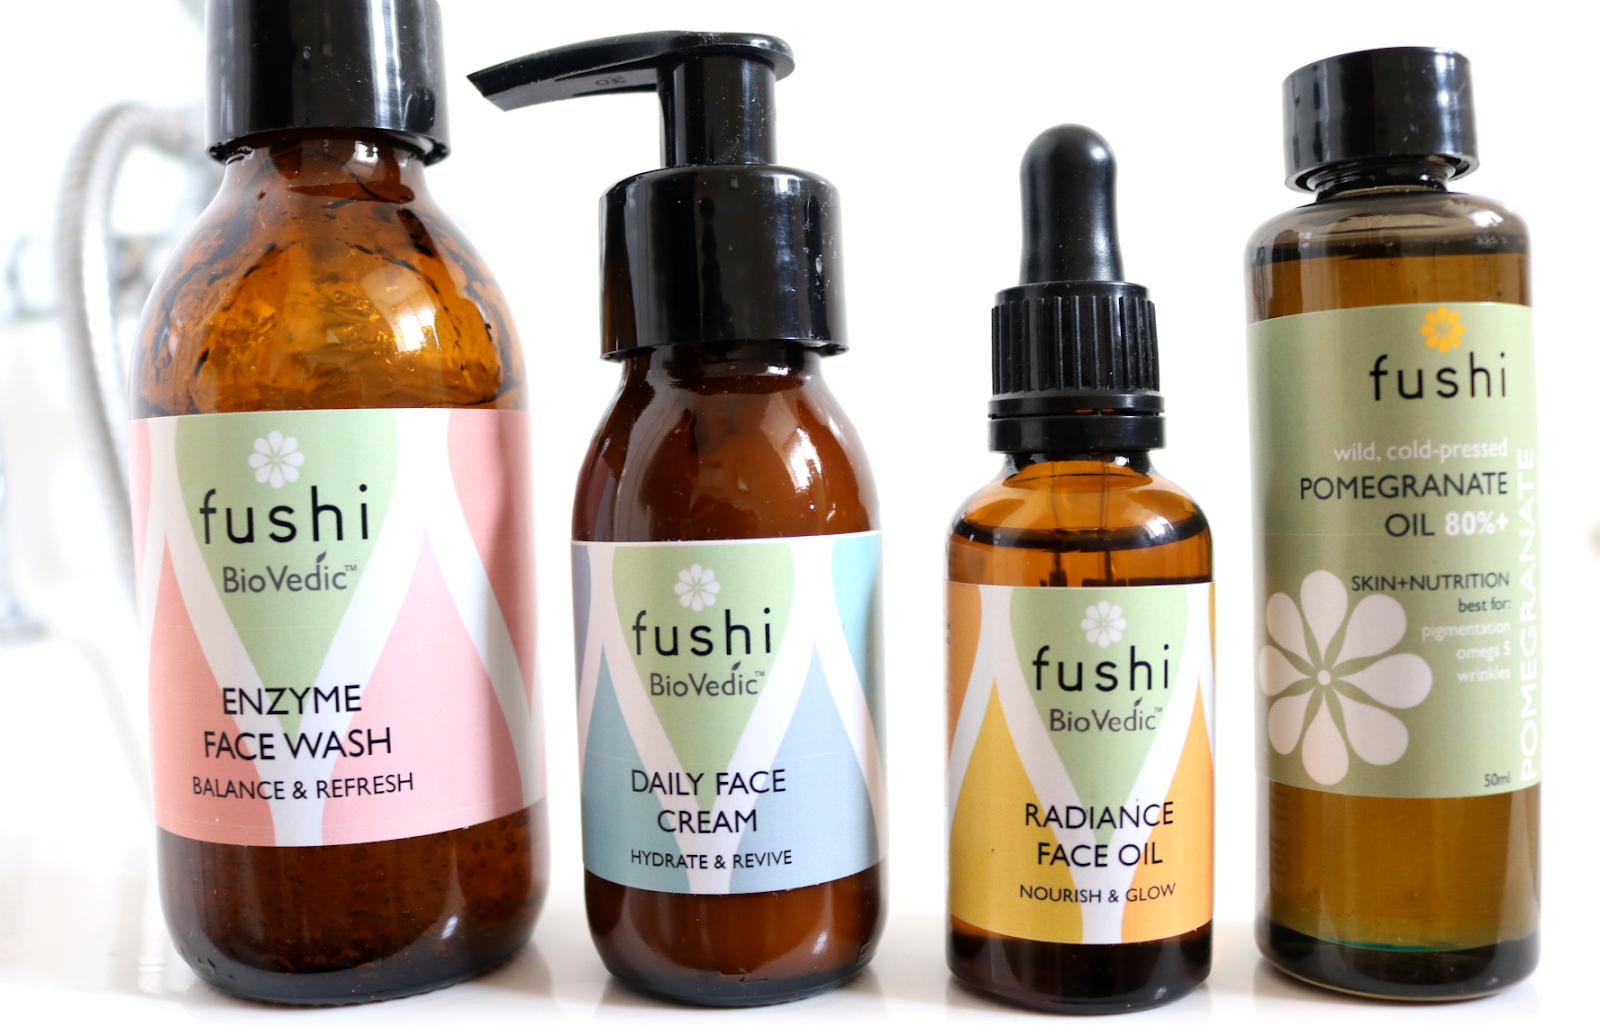 Fushi BioVedic Skincare - Enyzme Face Wash, Daily Face Cream, Radiance Face Oil + Pomegranate Oil 80% review